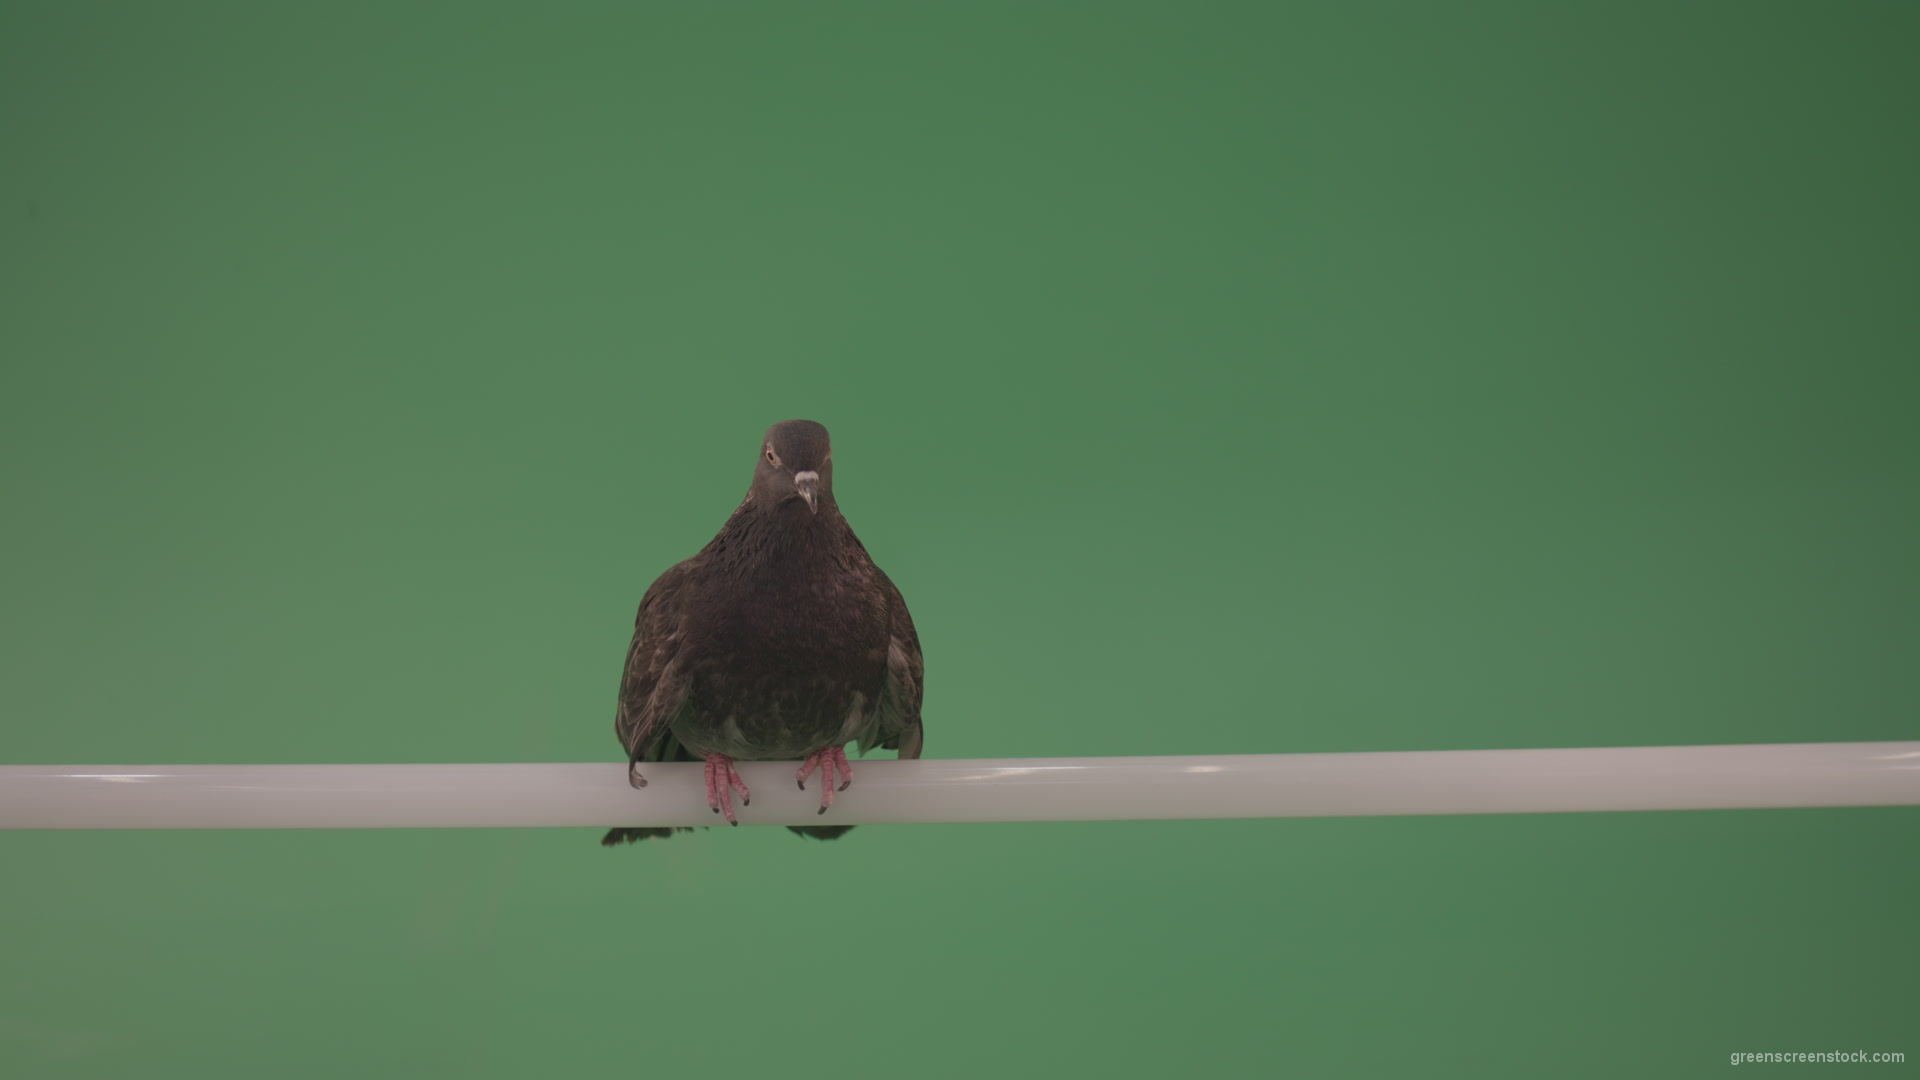 Dove-sitting-on-a-branch-in-the-city-isolated-in-green-screen-studio_009 Green Screen Stock